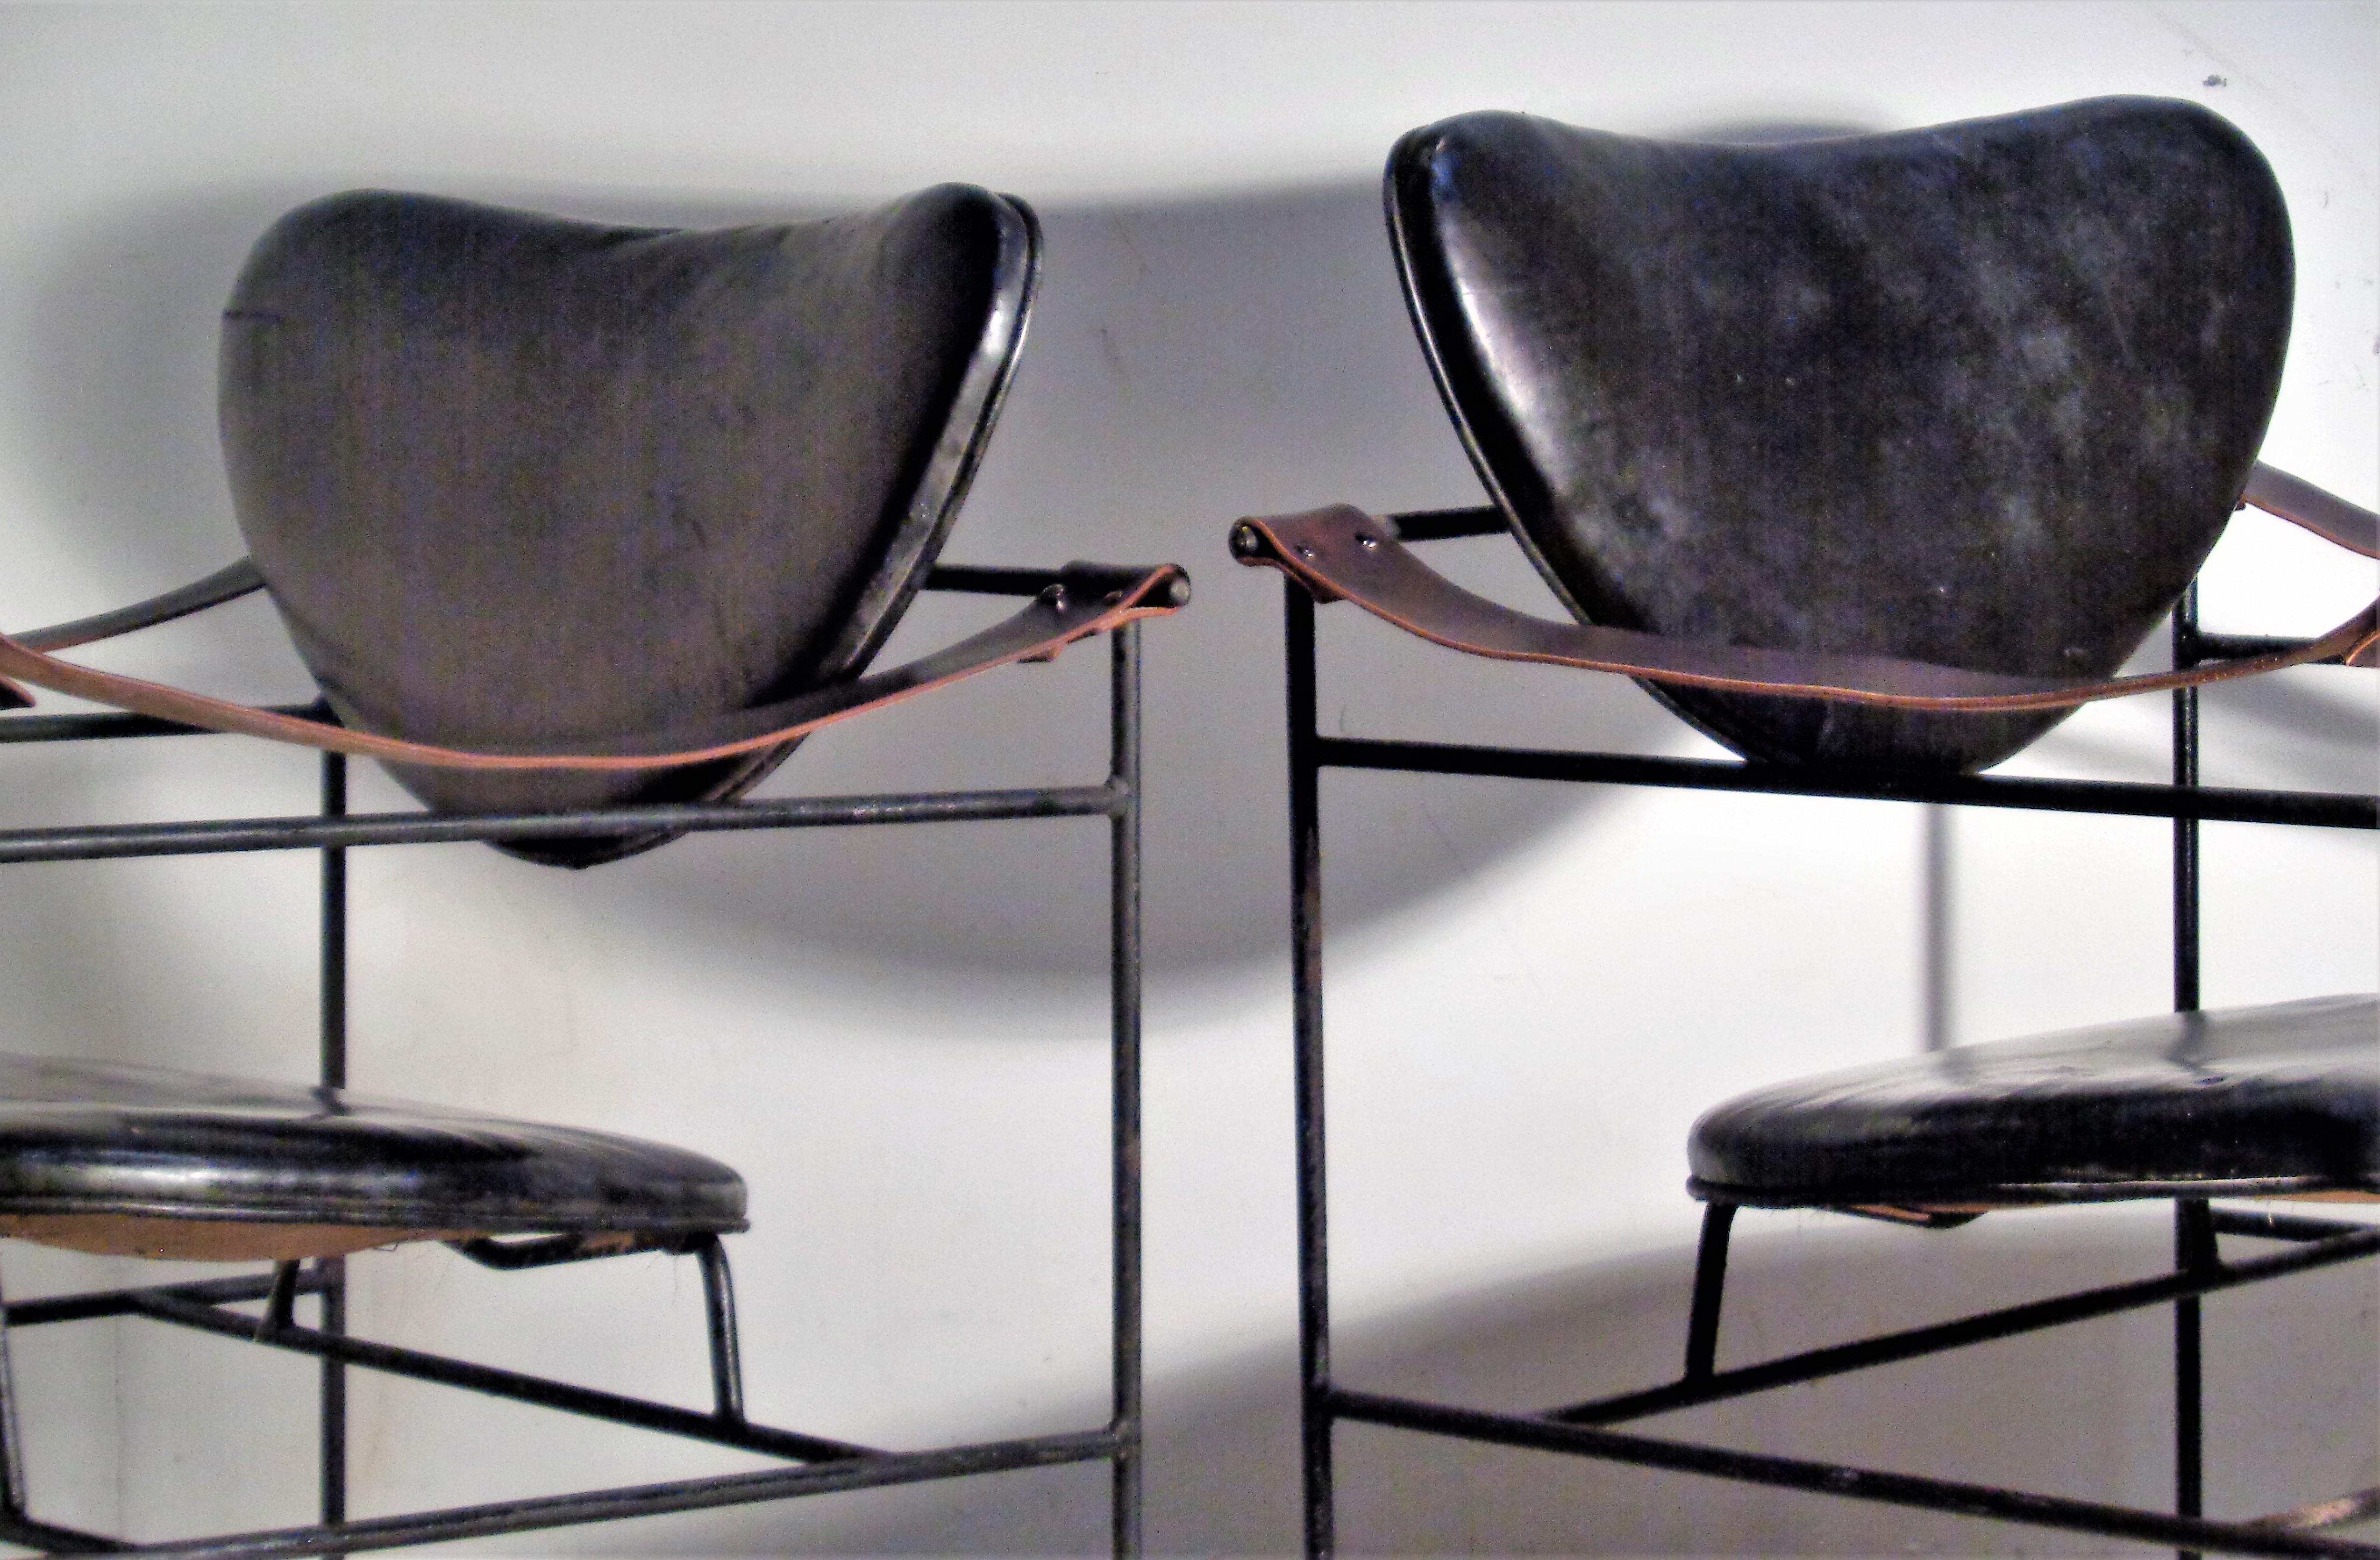 Pair of blackened iron frame lounge chairs with black leather seats and backs / brown saddle leather sling arms ( 25